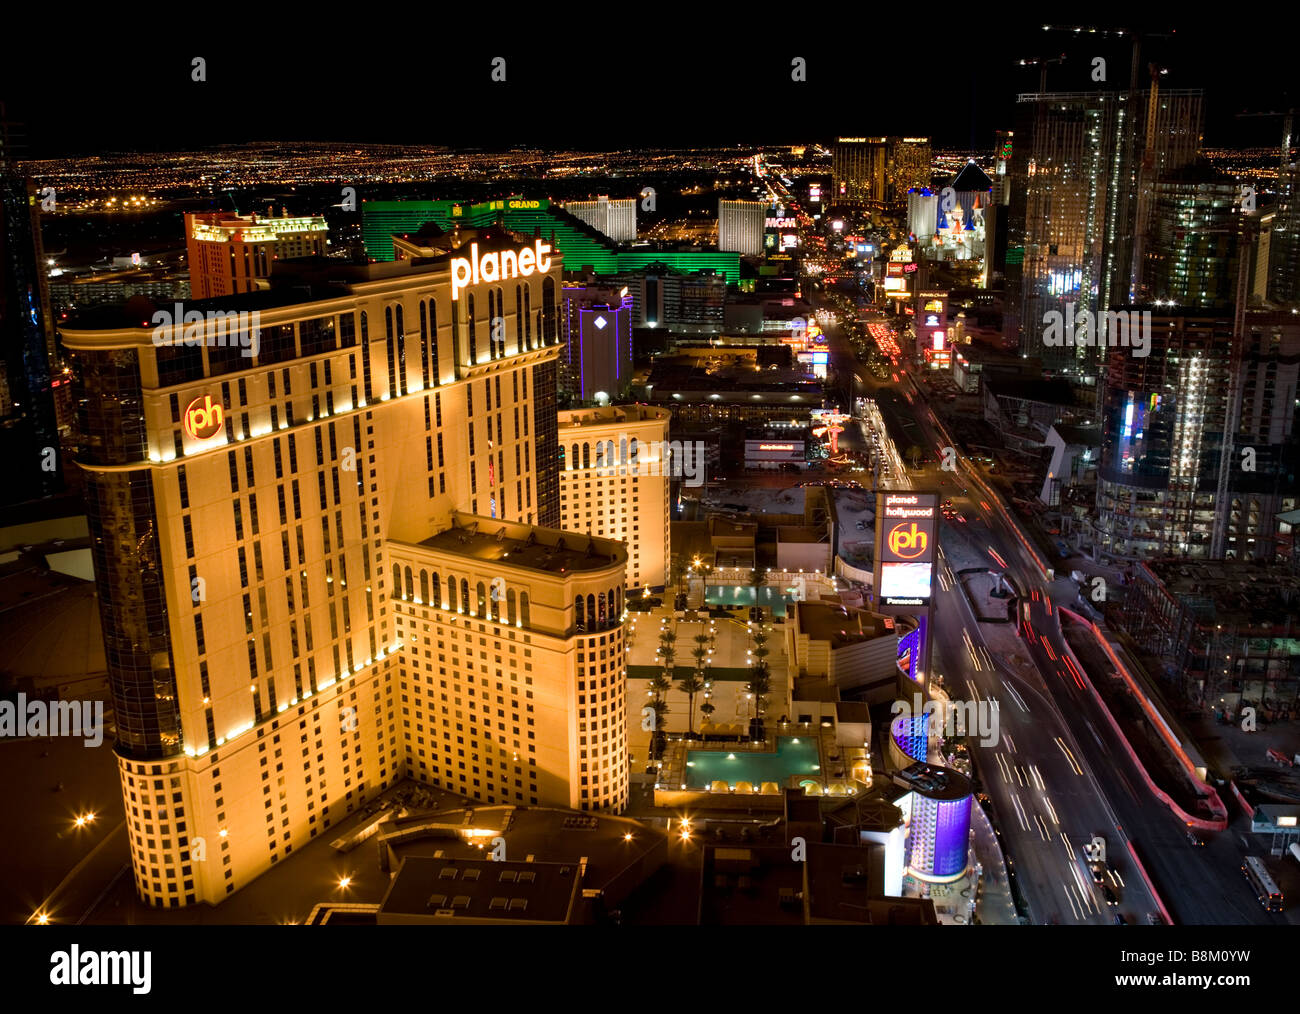 View Of The Las Vegas Strip At Night From The Top Of The Eiffel Tower Stock Photo Alamy